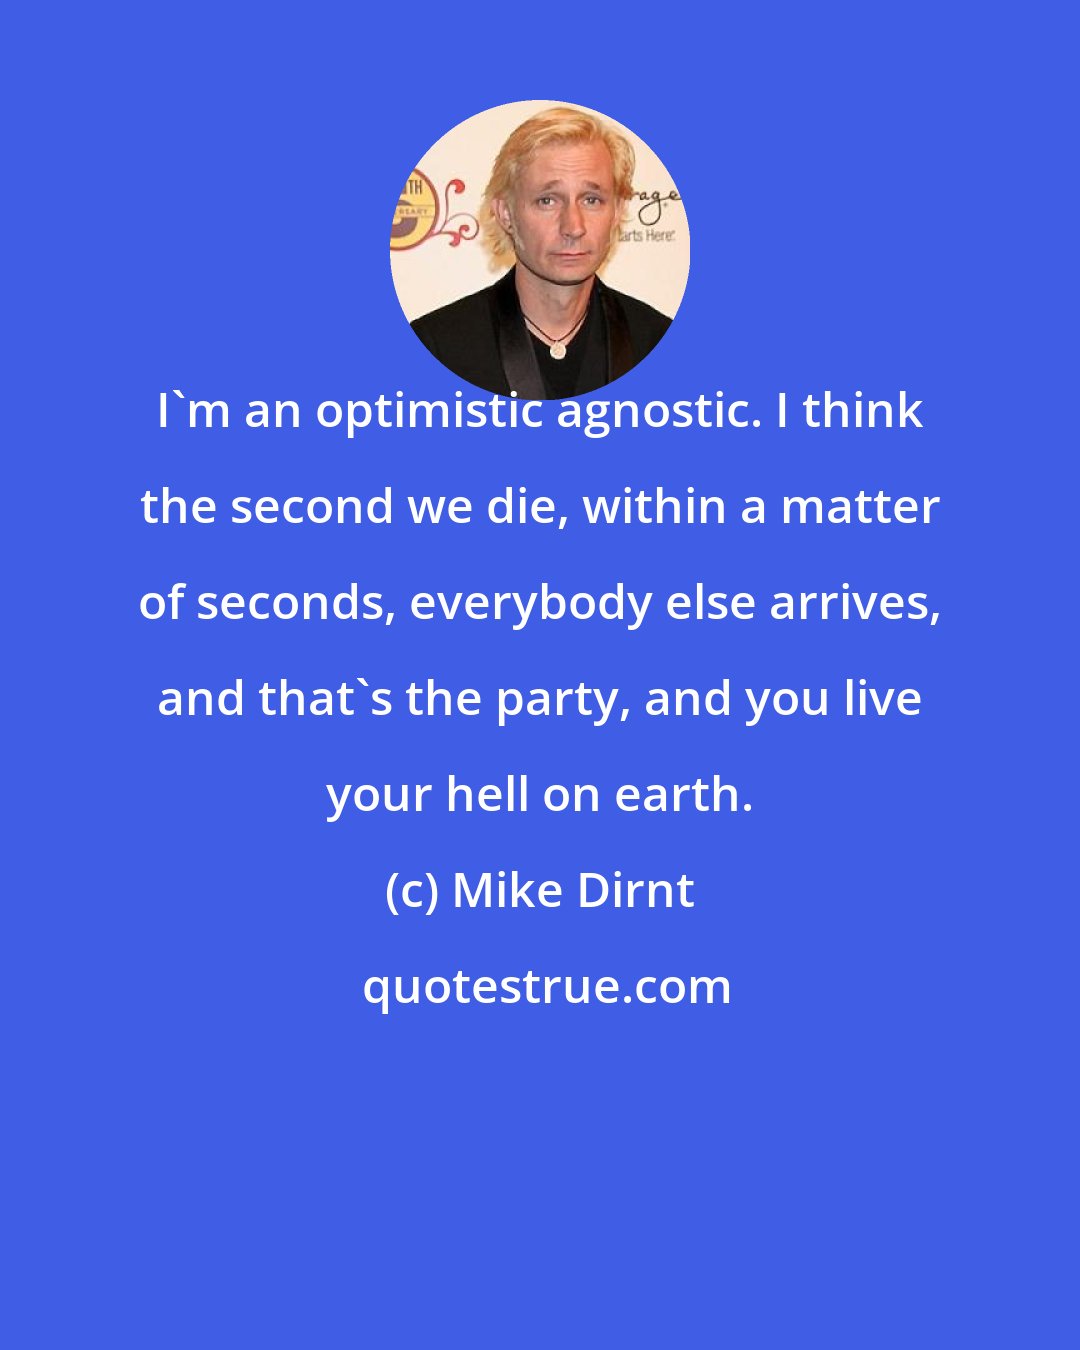 Mike Dirnt: I'm an optimistic agnostic. I think the second we die, within a matter of seconds, everybody else arrives, and that's the party, and you live your hell on earth.